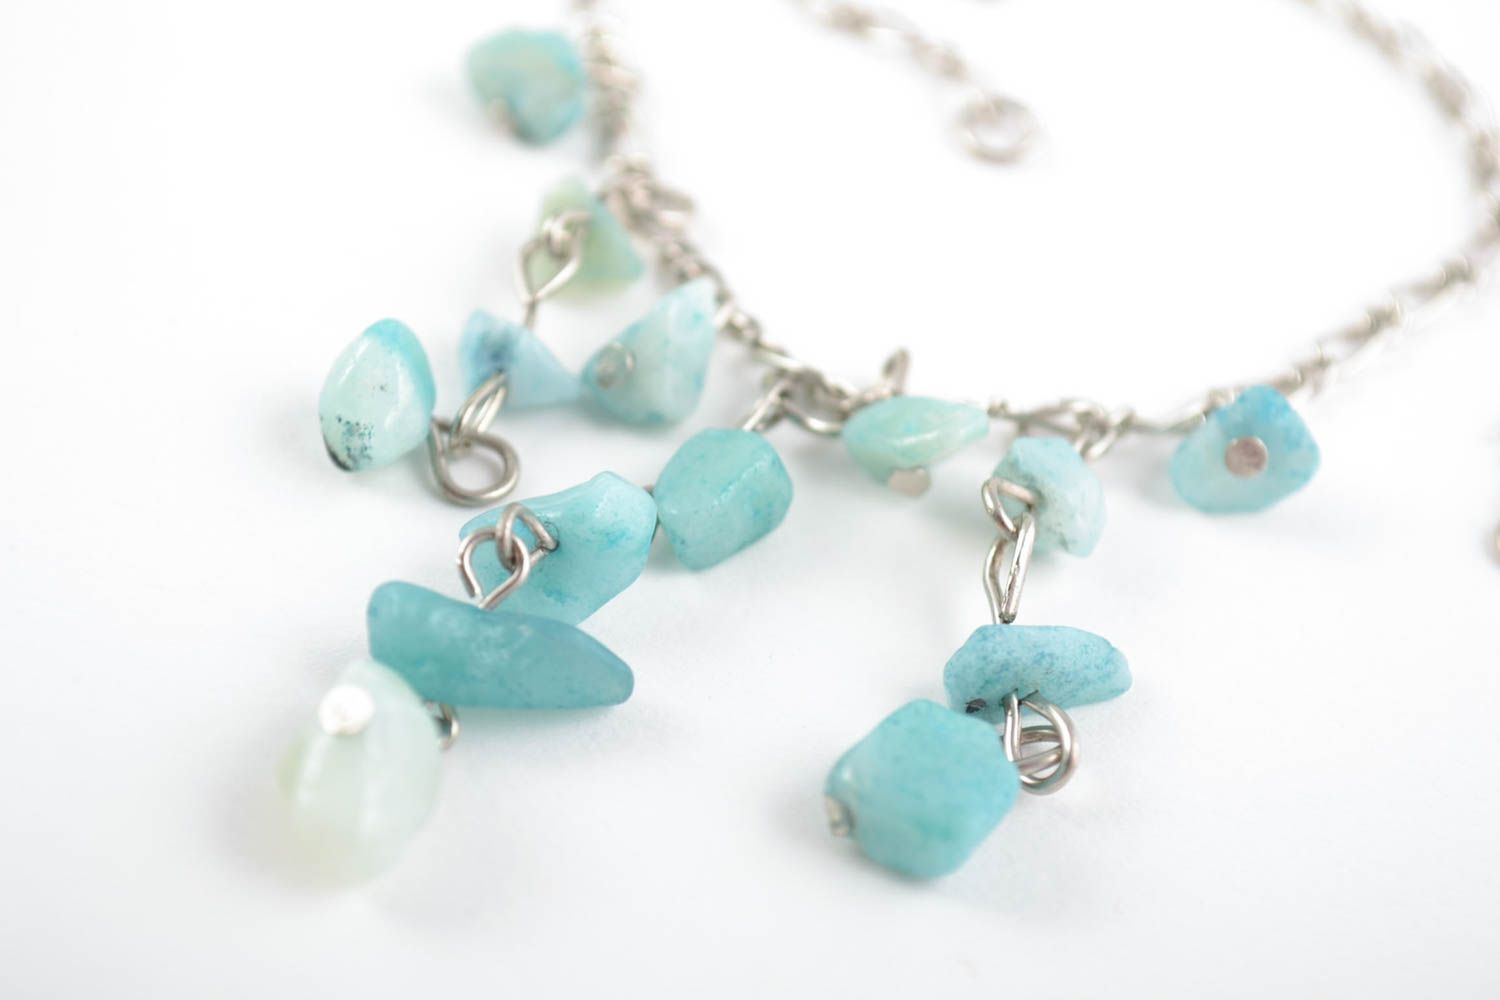 Handmade tender necklace with amazonite stones of turquoise color on metal chain photo 3